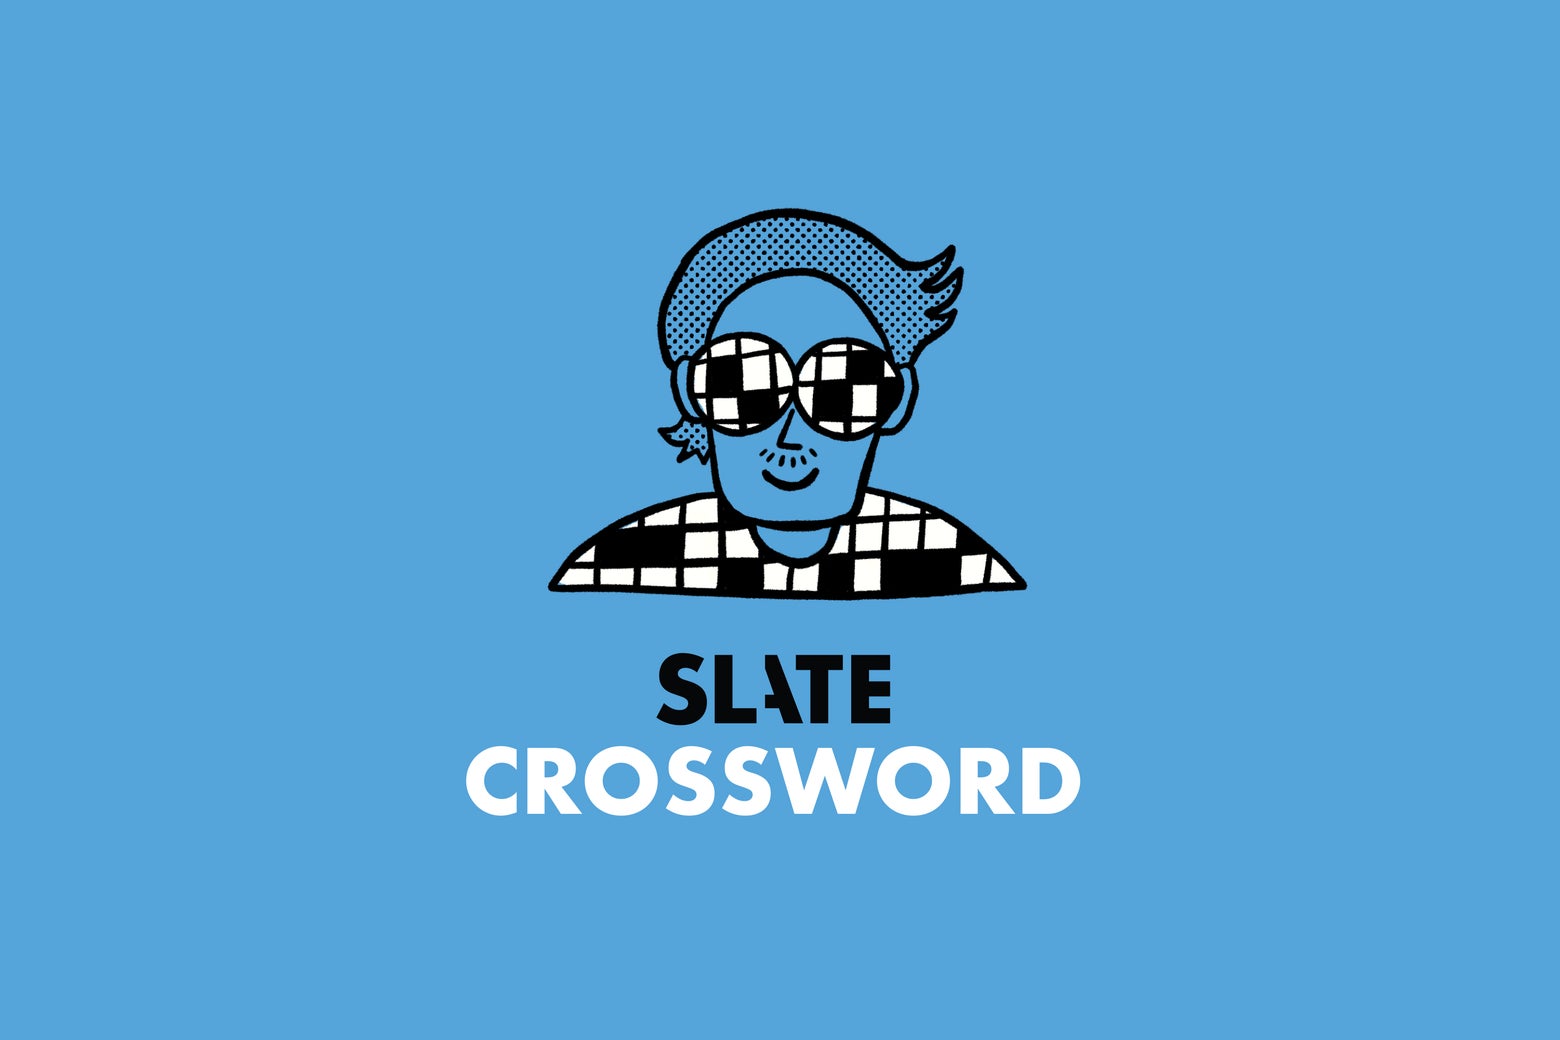 Slate Crossword: Naughty Verb for Austin Powers (4 Letters)
        
        
          
            April 22, 2024
            5:50 AM